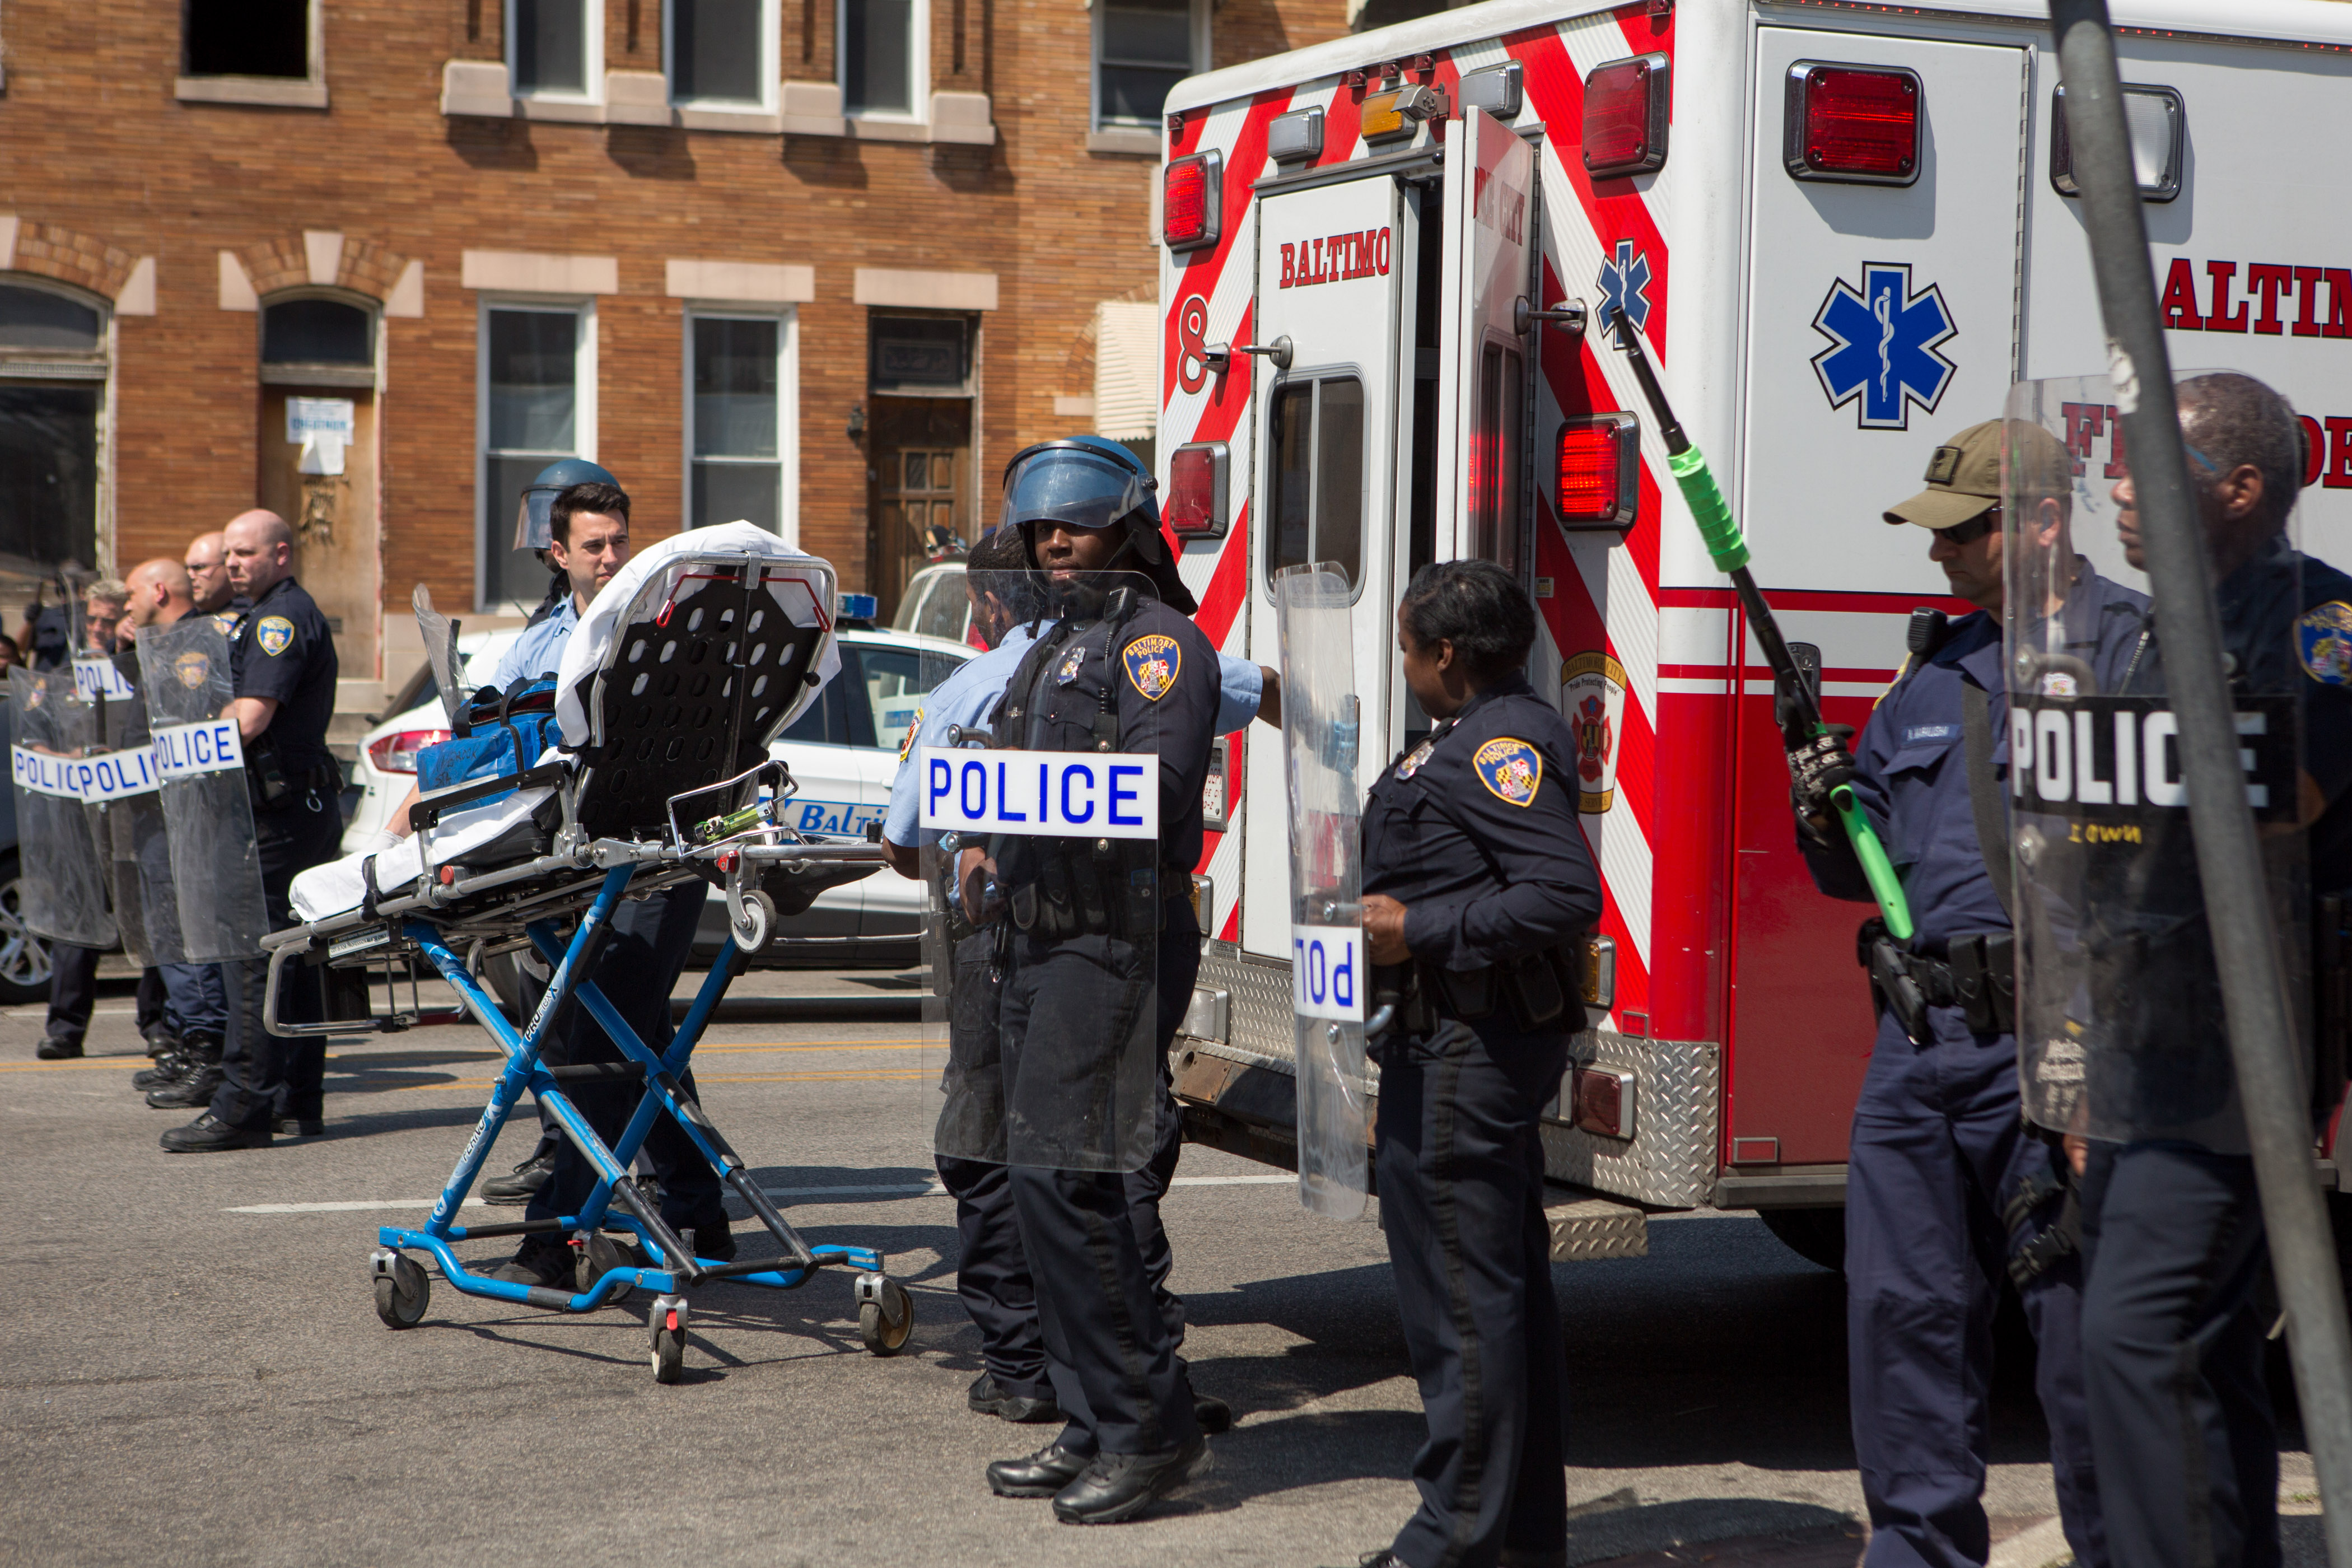 First responders roll a gurney on North Avenue in Baltimore. Police barricaded the block after initial reports indicated that a man had been shot by police, sparking anger in the crowd. Officials later reported that no one had been injured and the gun, carried by a man seen on a security camera, had discharged accidentally.  (Getty)